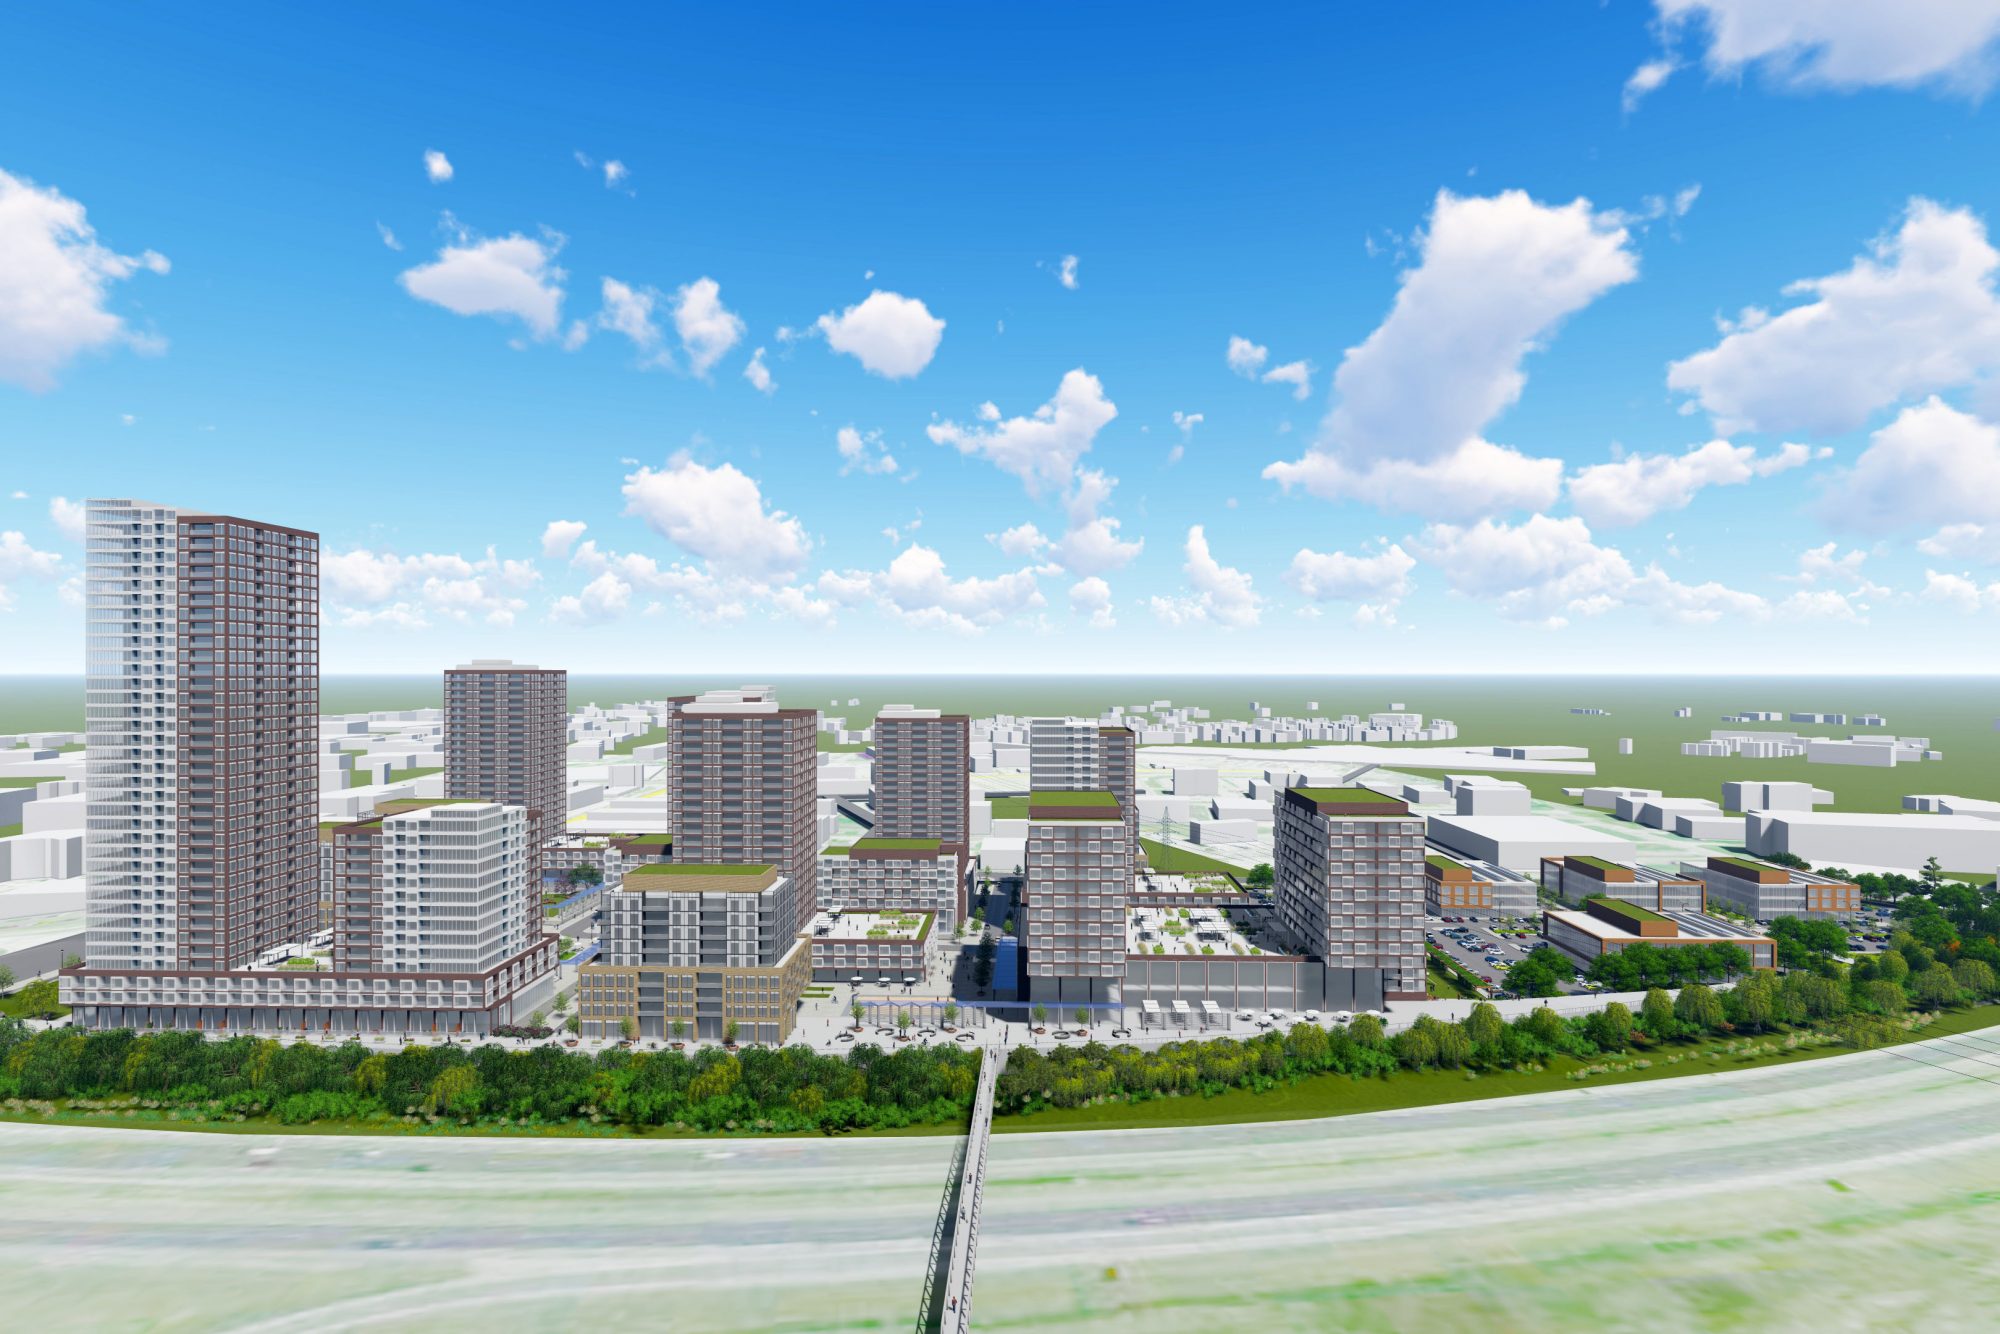 Aerial rendering of a development featuring a variety of buildings and outdoor spaces.